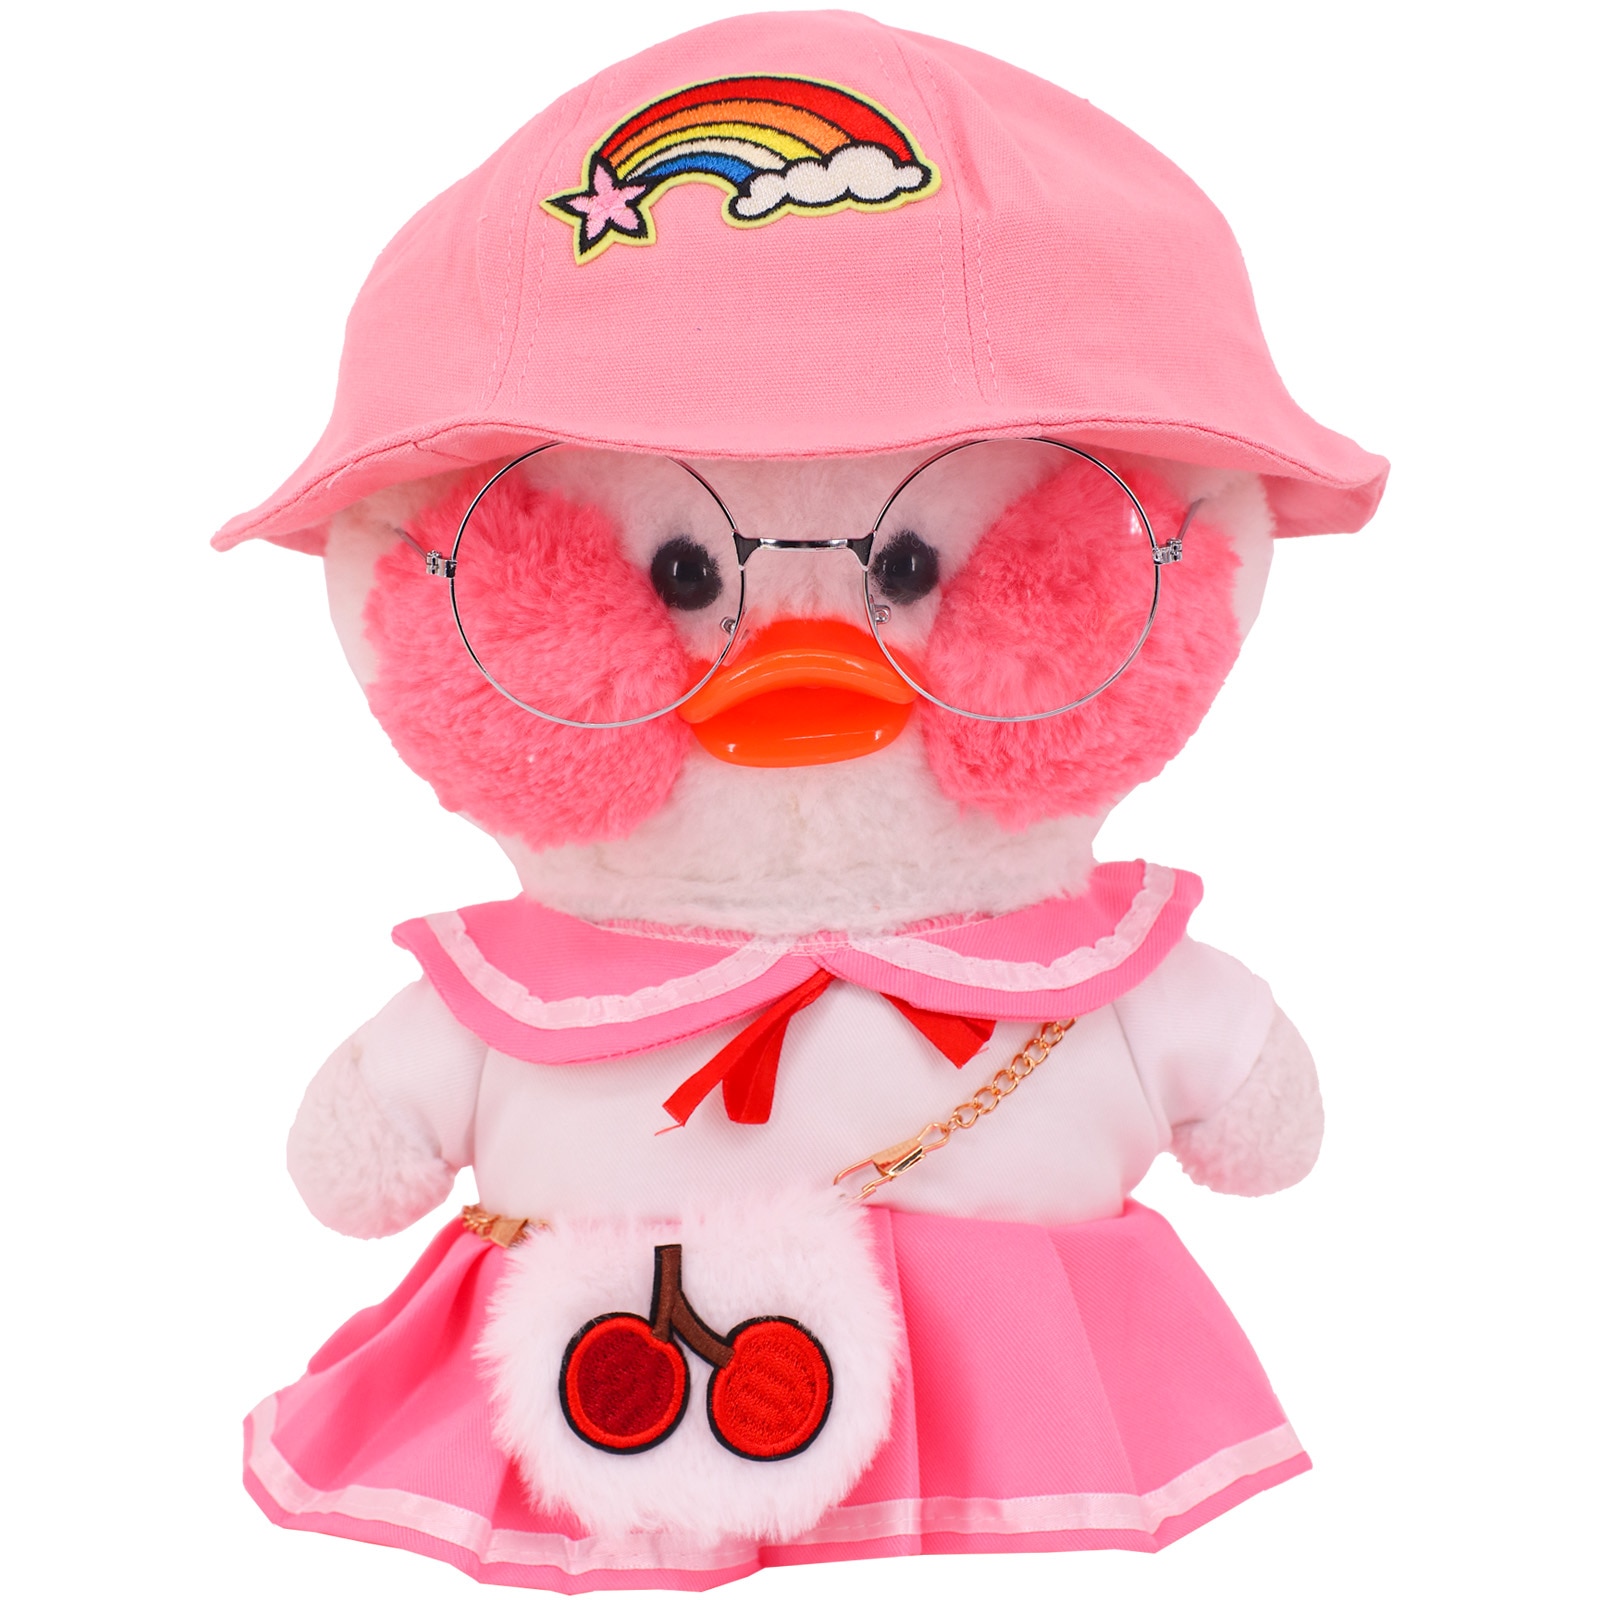 30 LalaFanfan Duck Pink Series Clothes Accessories Stuffed Soft Duck Figure Toy Animal Birthday Girl Gift 4 - Lalafanfan Shop